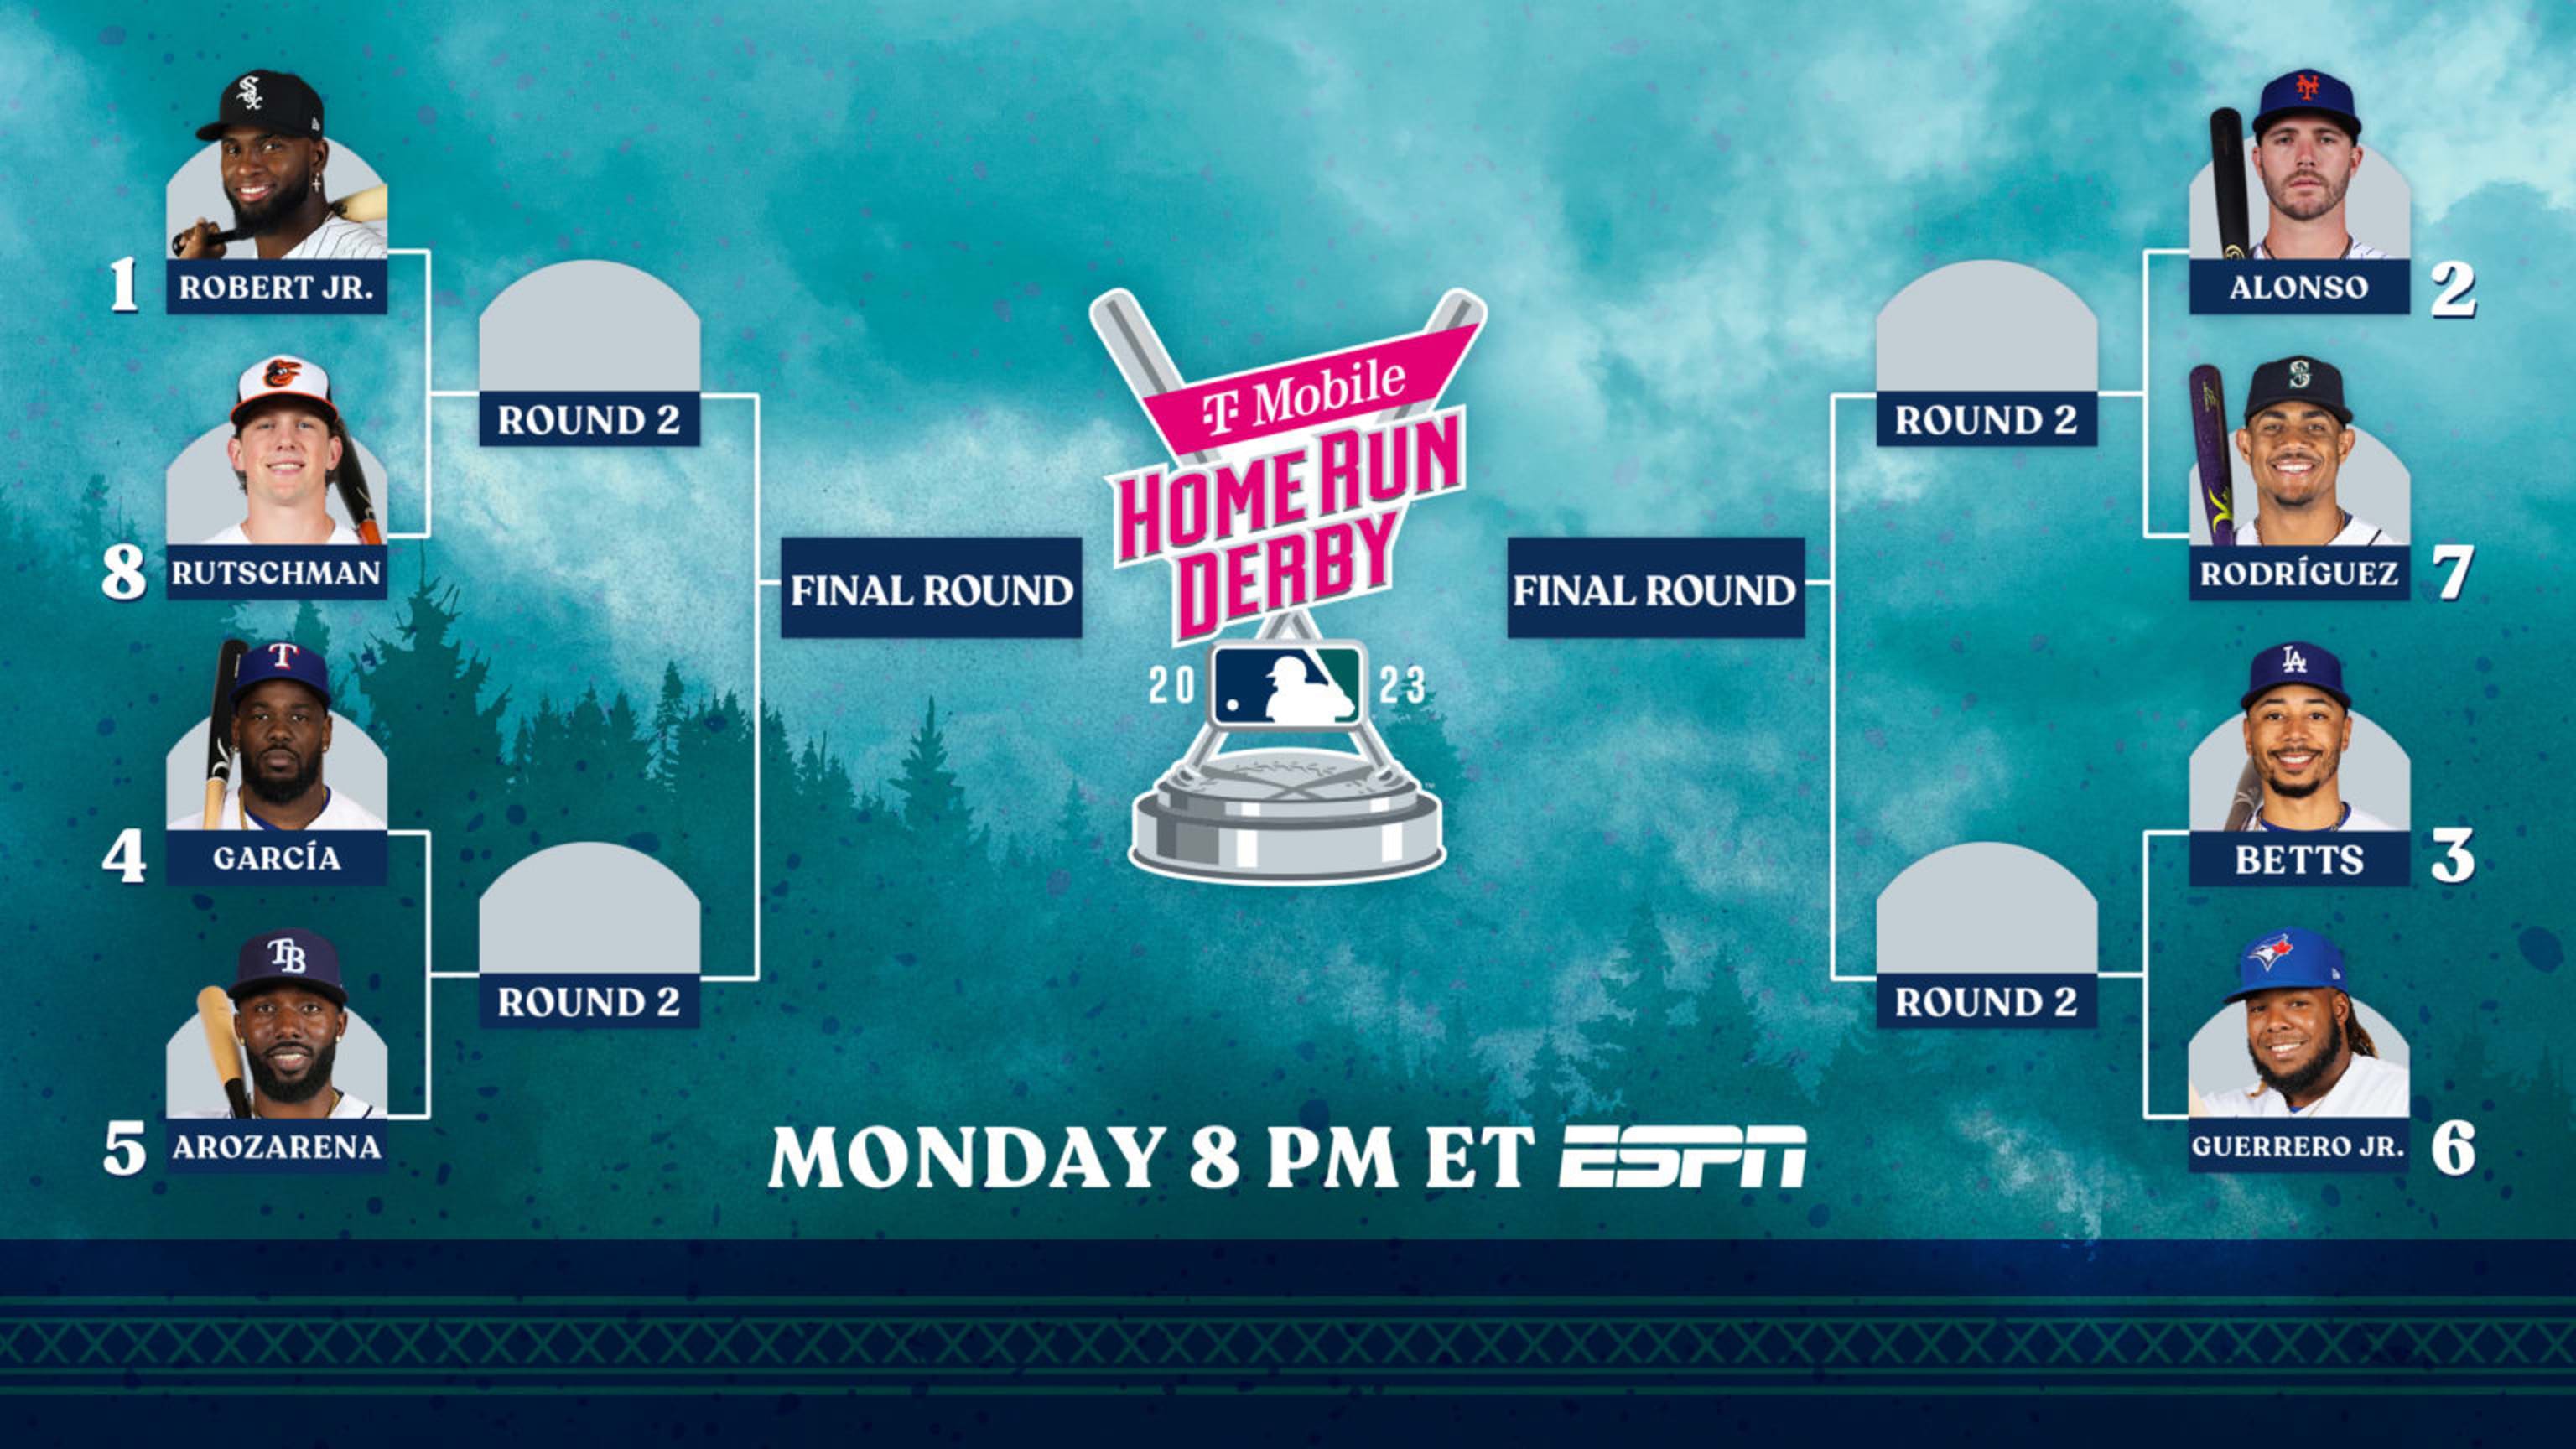 Home Run Derby Bracket, rules and tune in